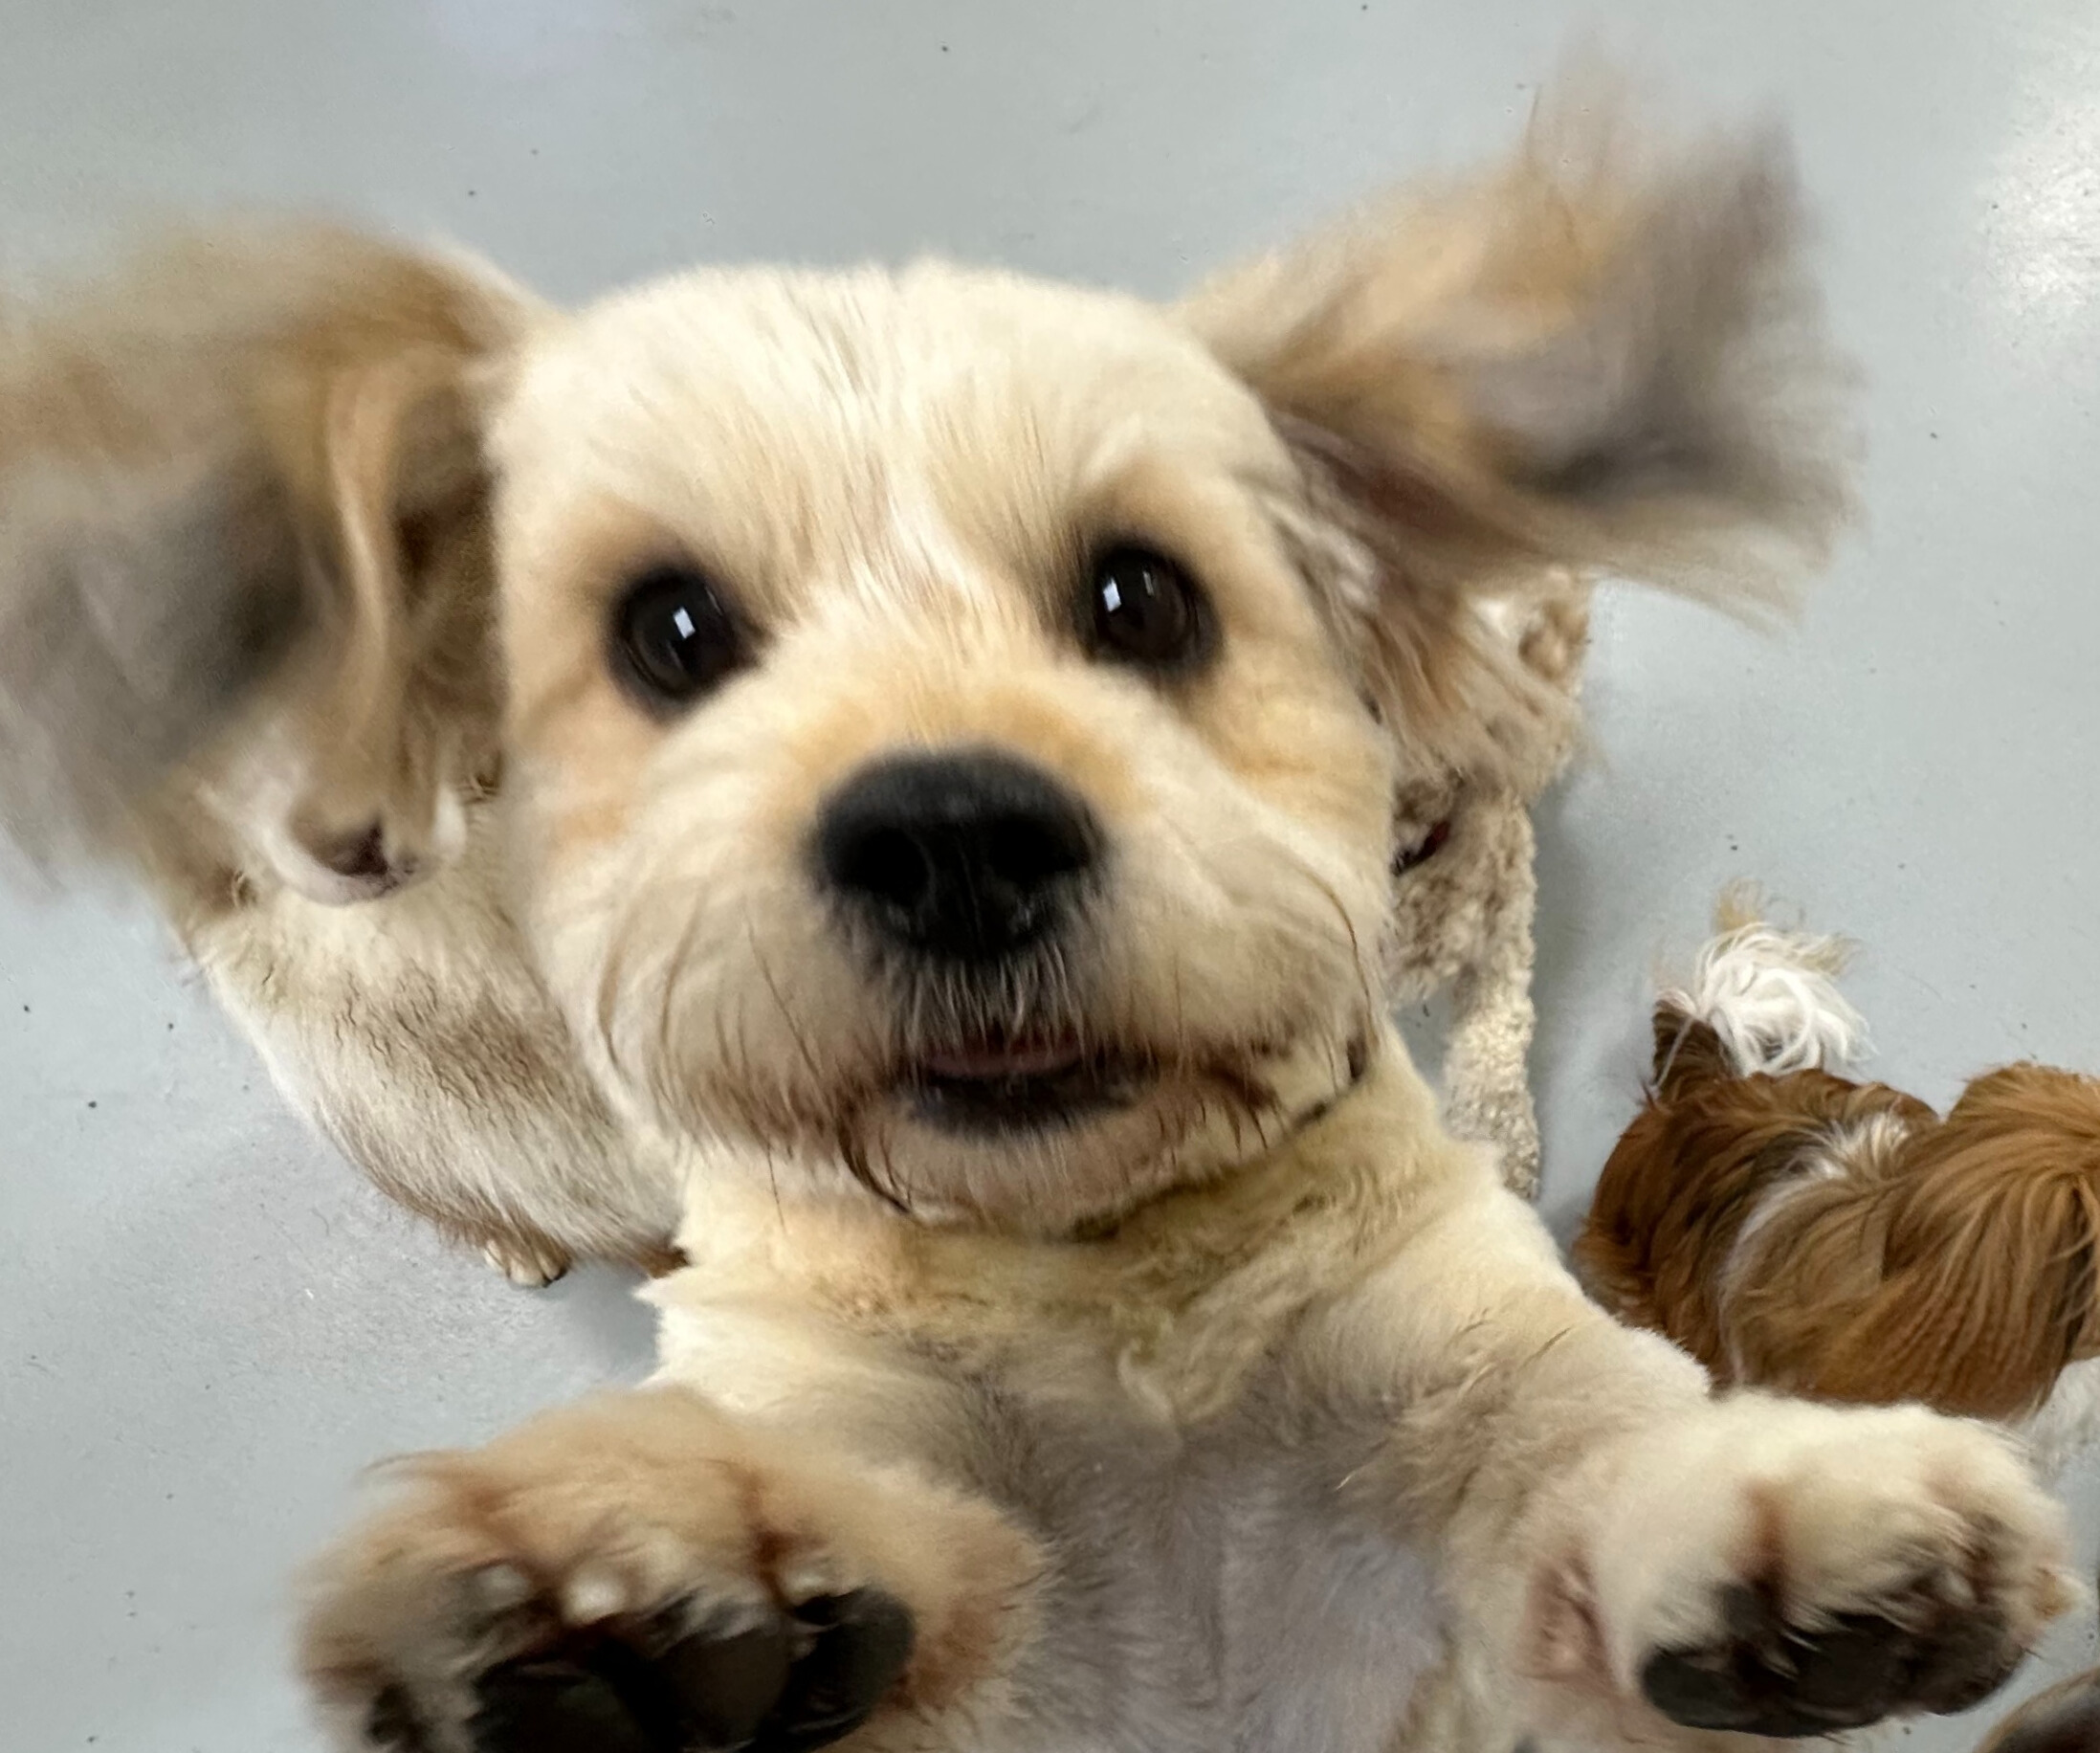 In front of a gray background, an energetic, light-colored puppy is seen from a ground-level perspective.